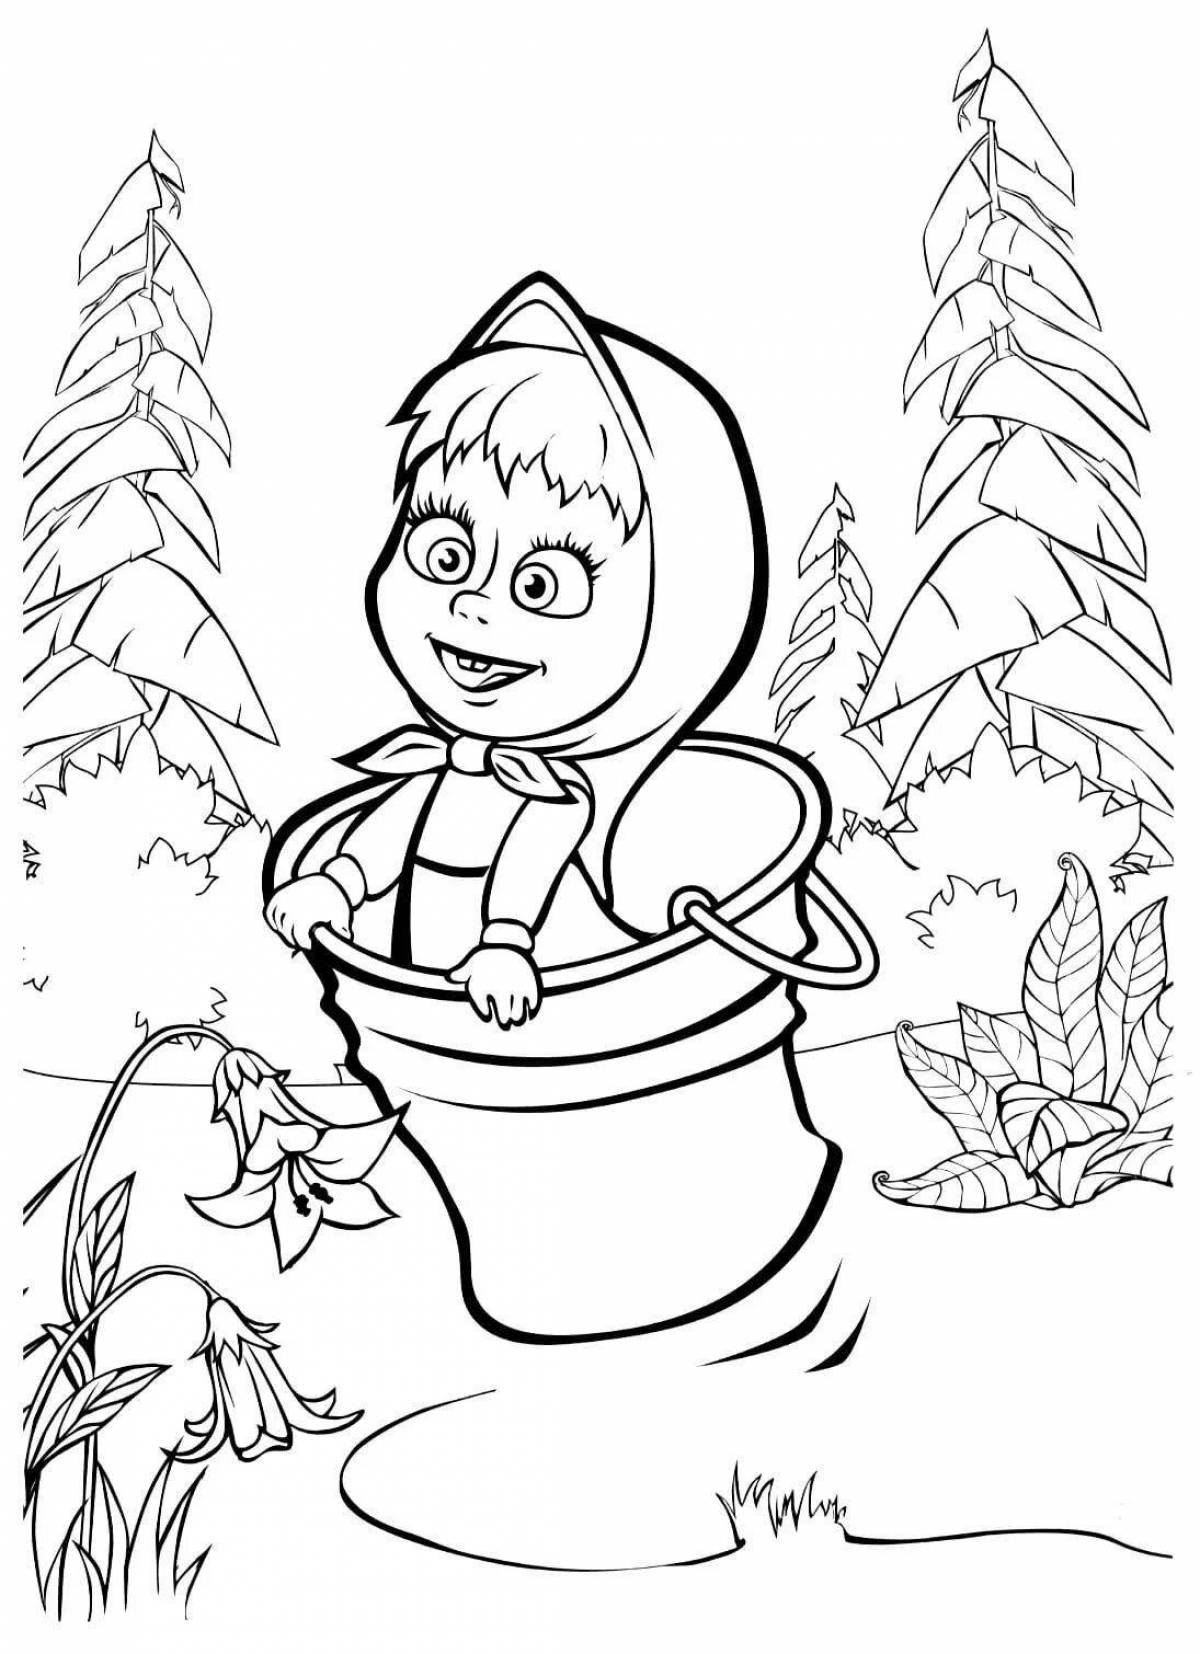 Masha and the bear deluxe coloring book